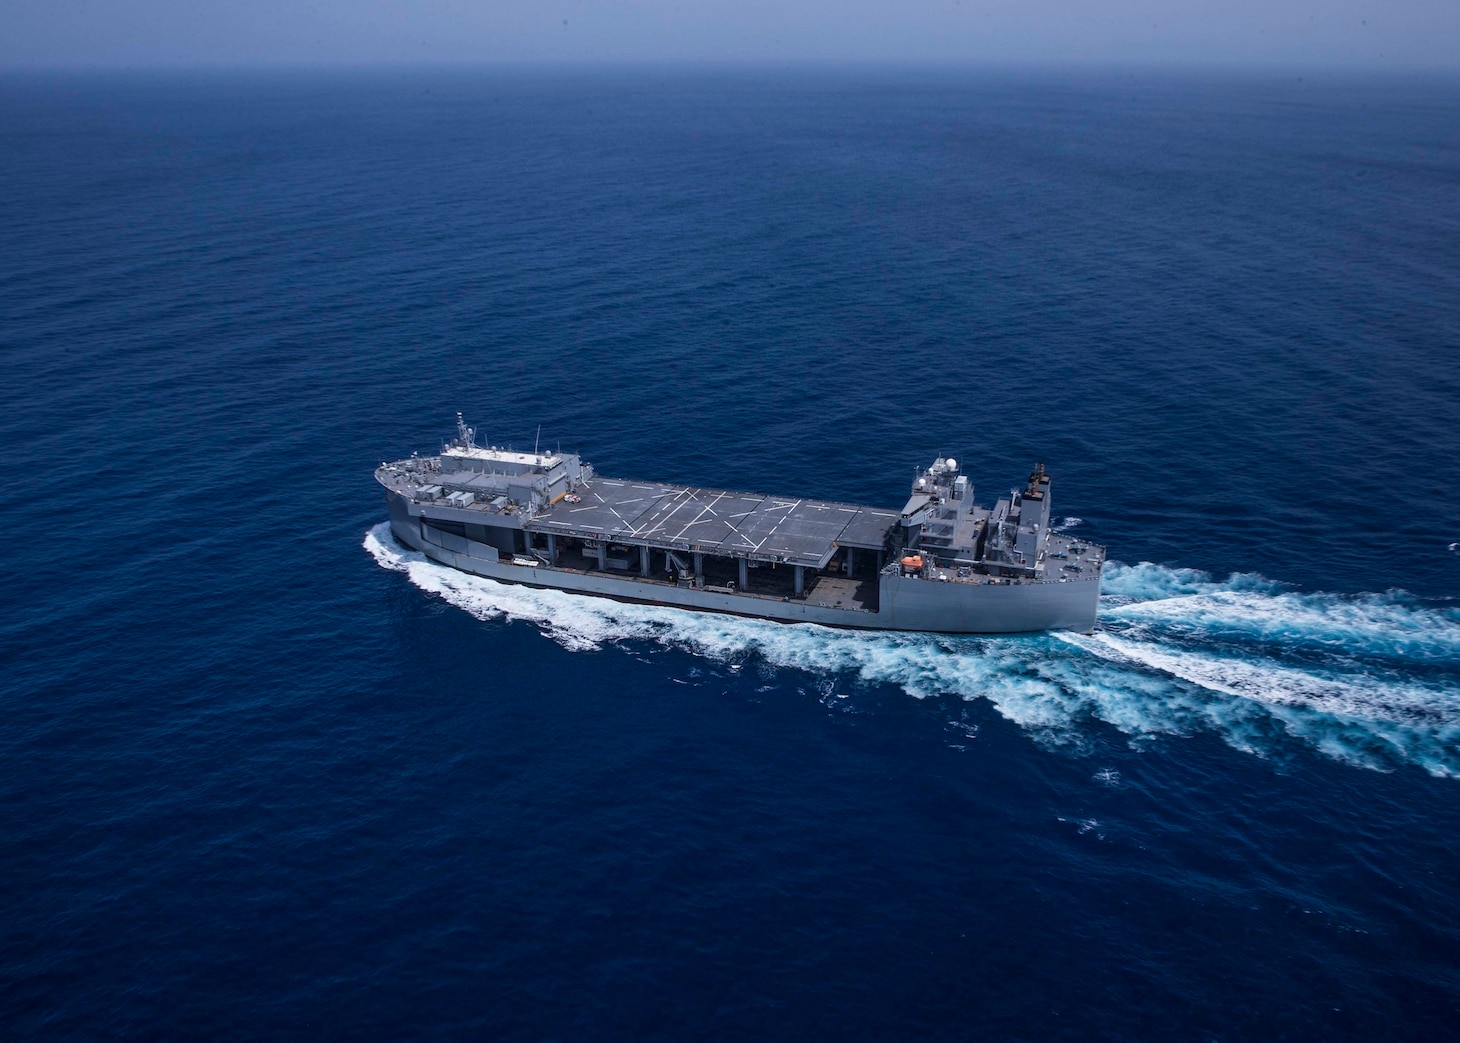 The Expeditionary Sea Base USS Hershel “Woody” Williams (ESB 4) sails in the Atlantic Ocean